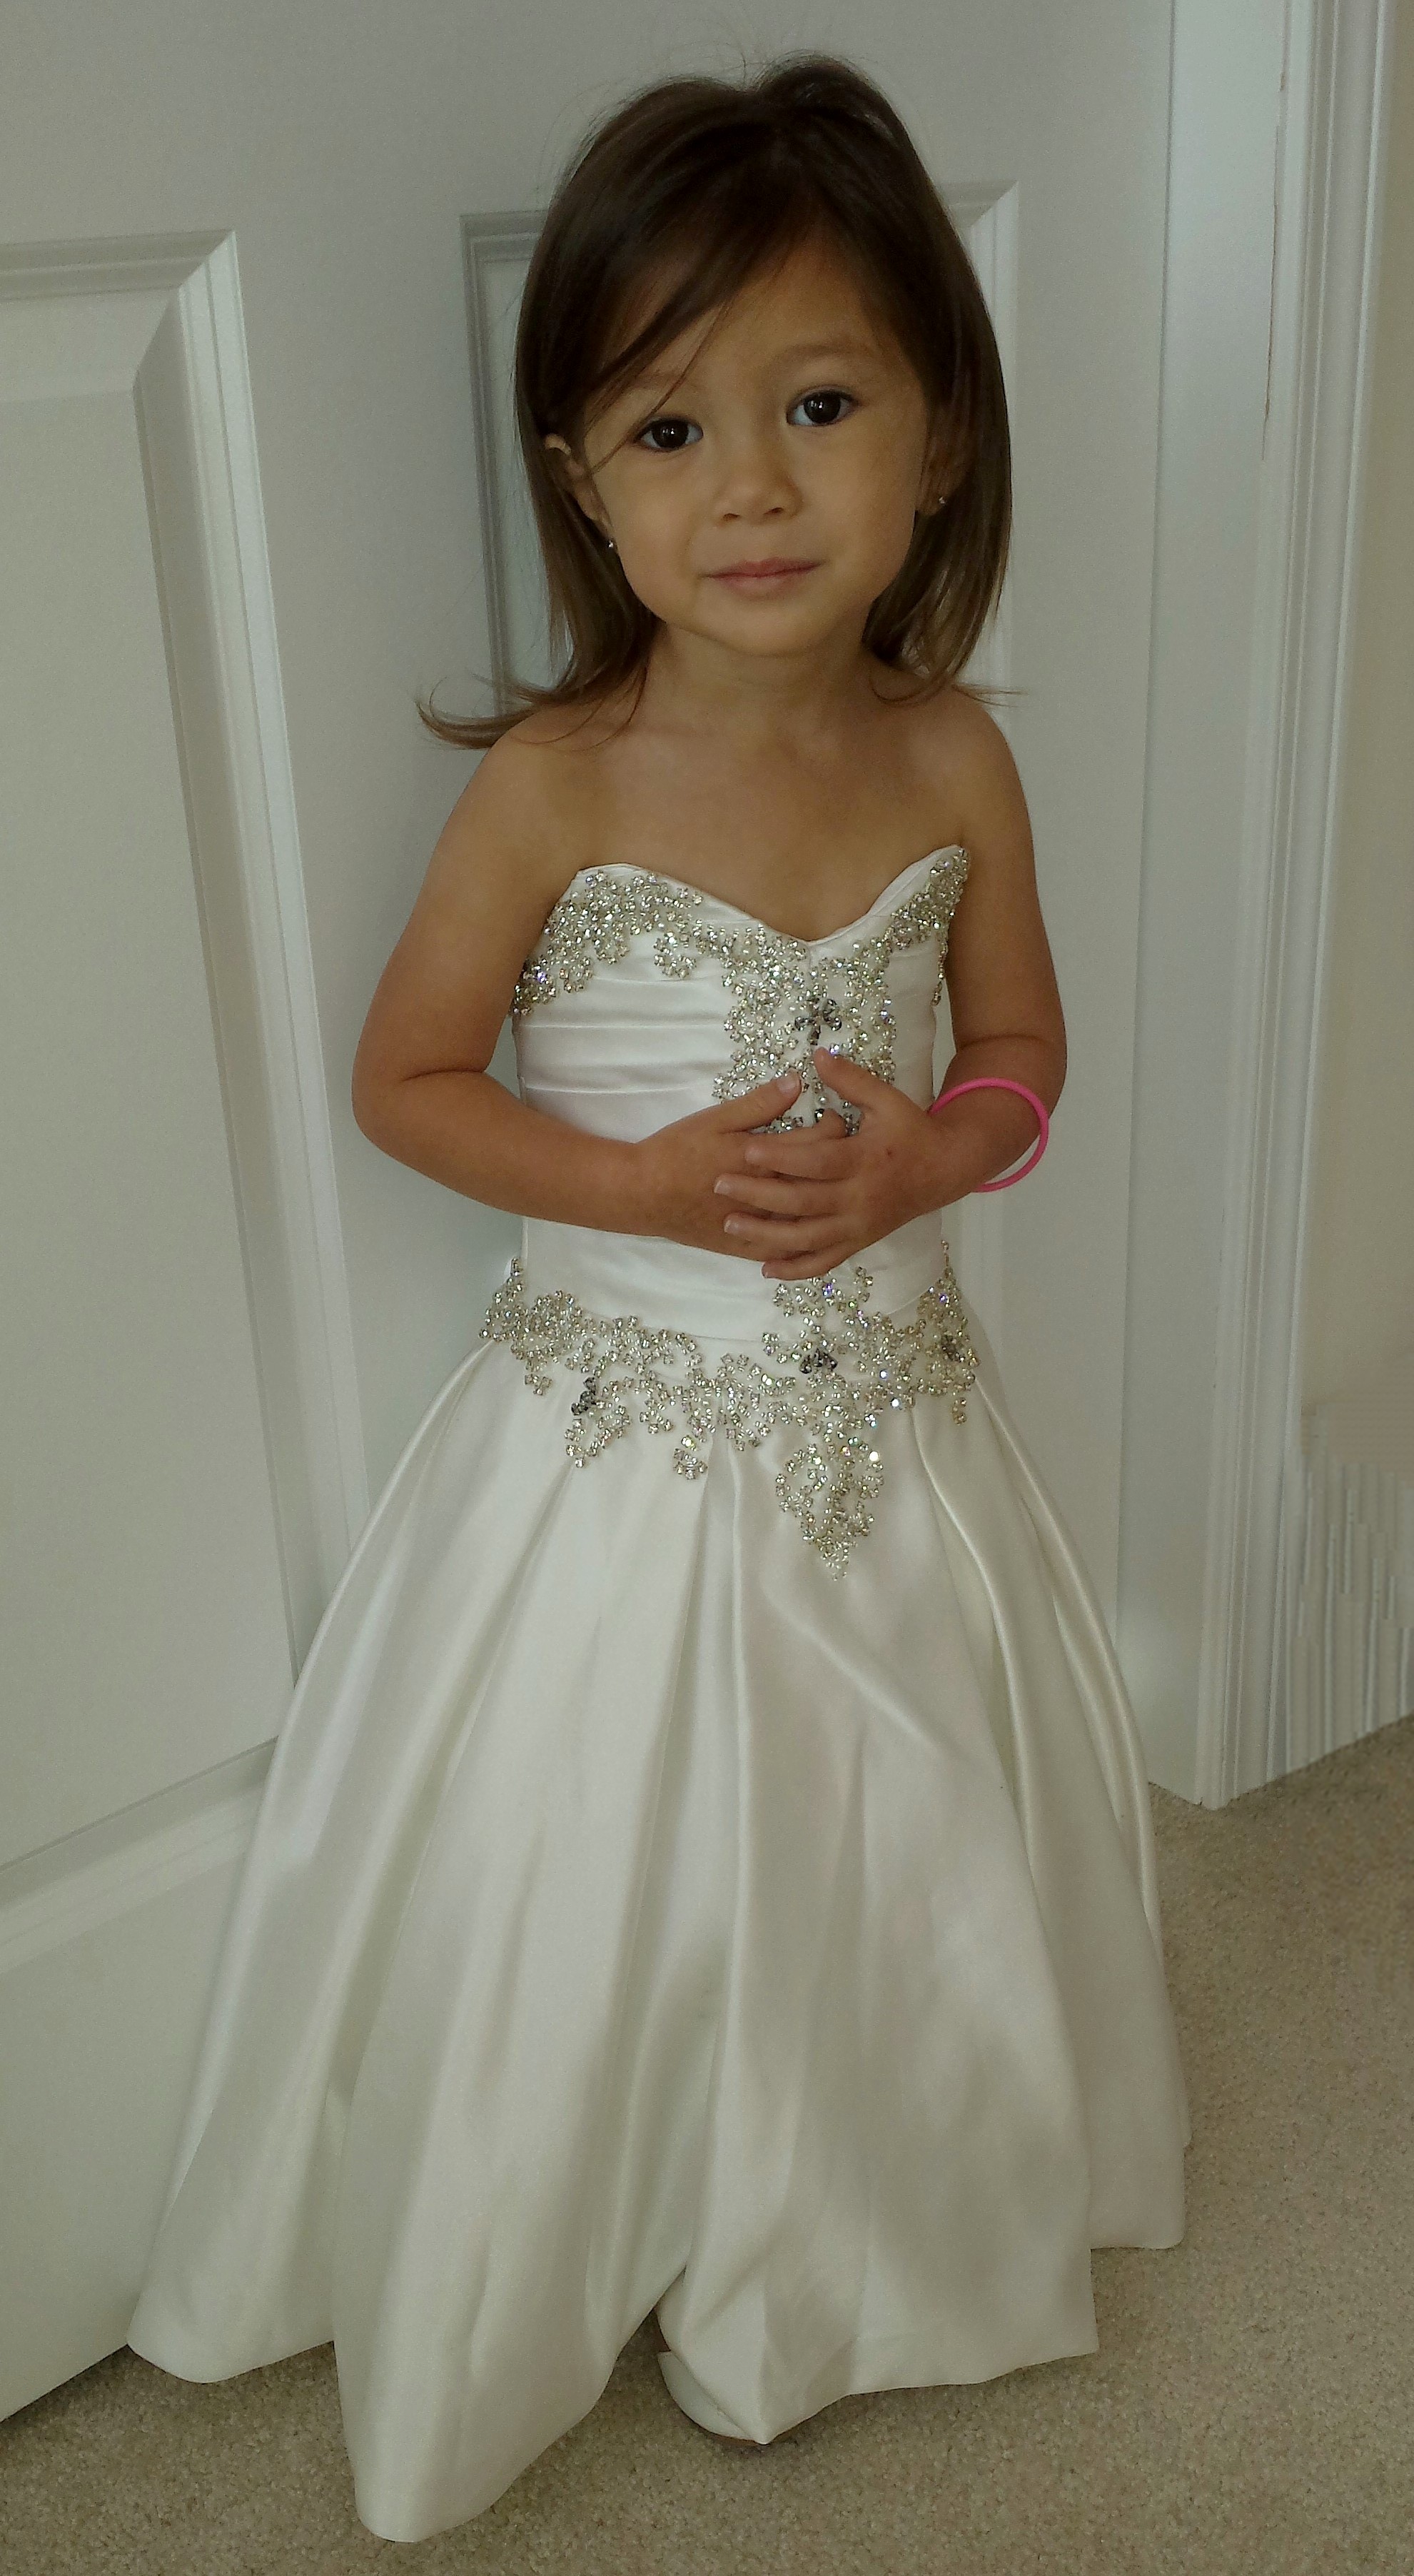 Tiny toddler dress to match the brides